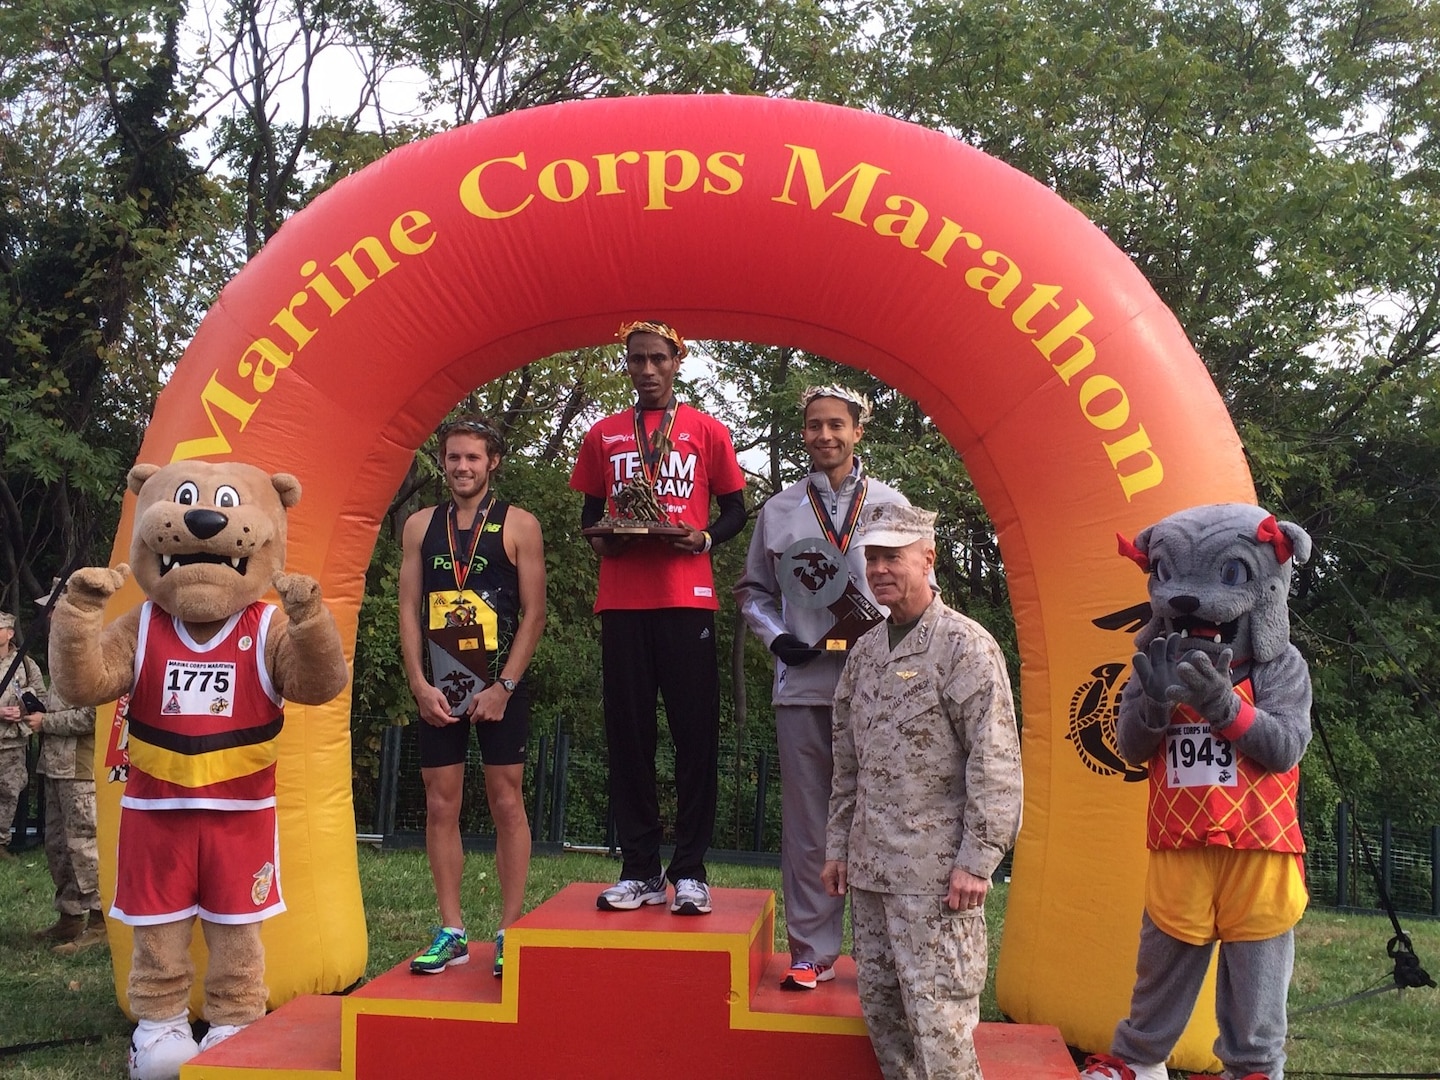 Commandant of the Marine Corps, General Amos presents the top three finishers of the Marine Corps Marathon Mens Division.  Coast Guard LT Patrick Fernandez, Yorktown, VA competes with the All-Navy Marathon Team with a time of 2:22:52 finishes 2nd overall at the Marine Corps Marathon and places 1st in the Armed Forces Marathon Mens Championship.  First overall was Girma Bedada from Columbia, GA finished at 2:21:32 and Richard Morris from Burkeville, VA finished third with 2:24:02.  